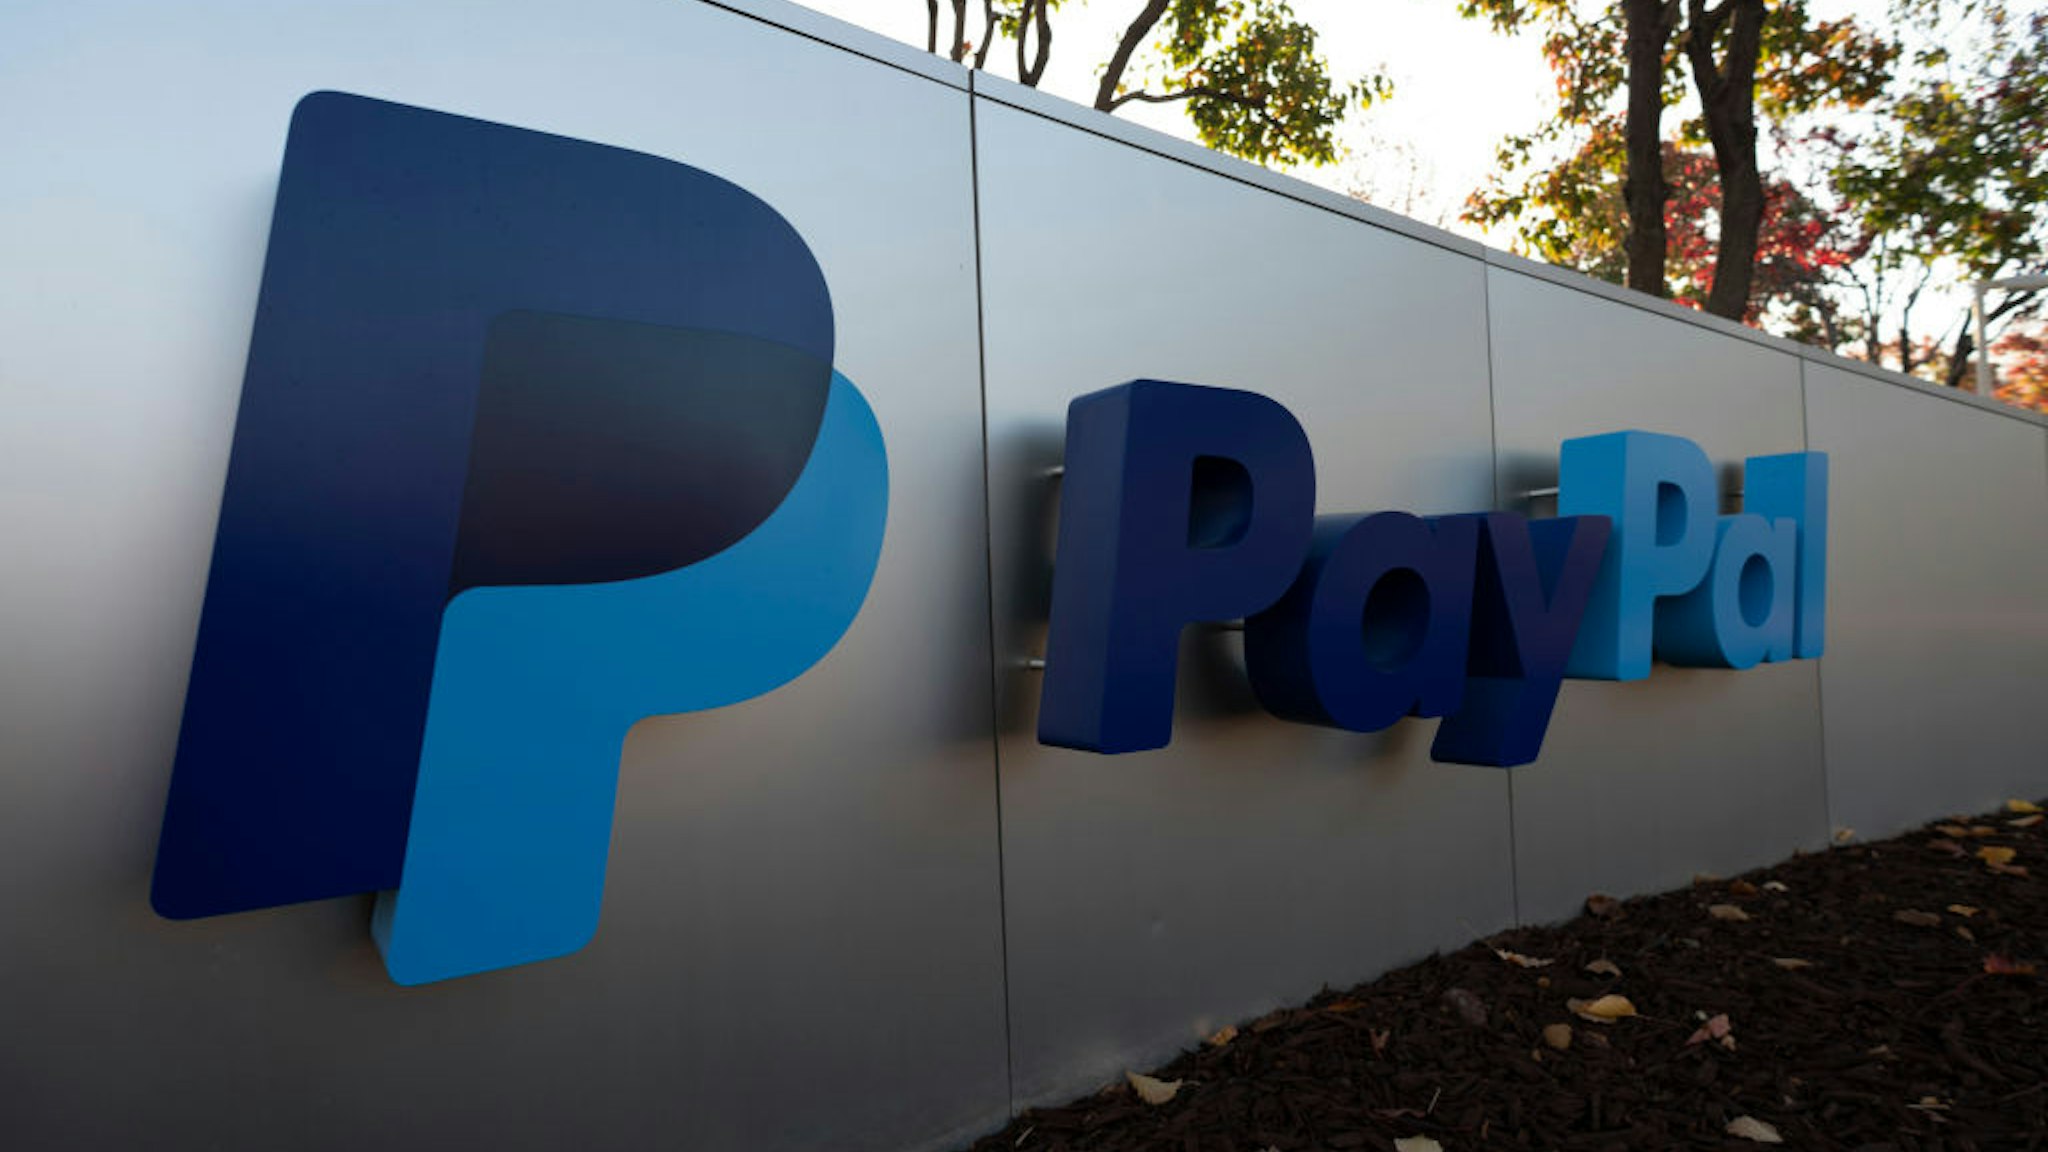 PayPal logo can be seen at its office in San Jose, California, United States on November 23, 2019. PayPal has agreed to acquire Honey Science Corporation, a rapidly-growing technology platform for shopping and rewards, for approximately $4 billion. (Photo by Yichuan Cao/NurPhoto via Getty Images)